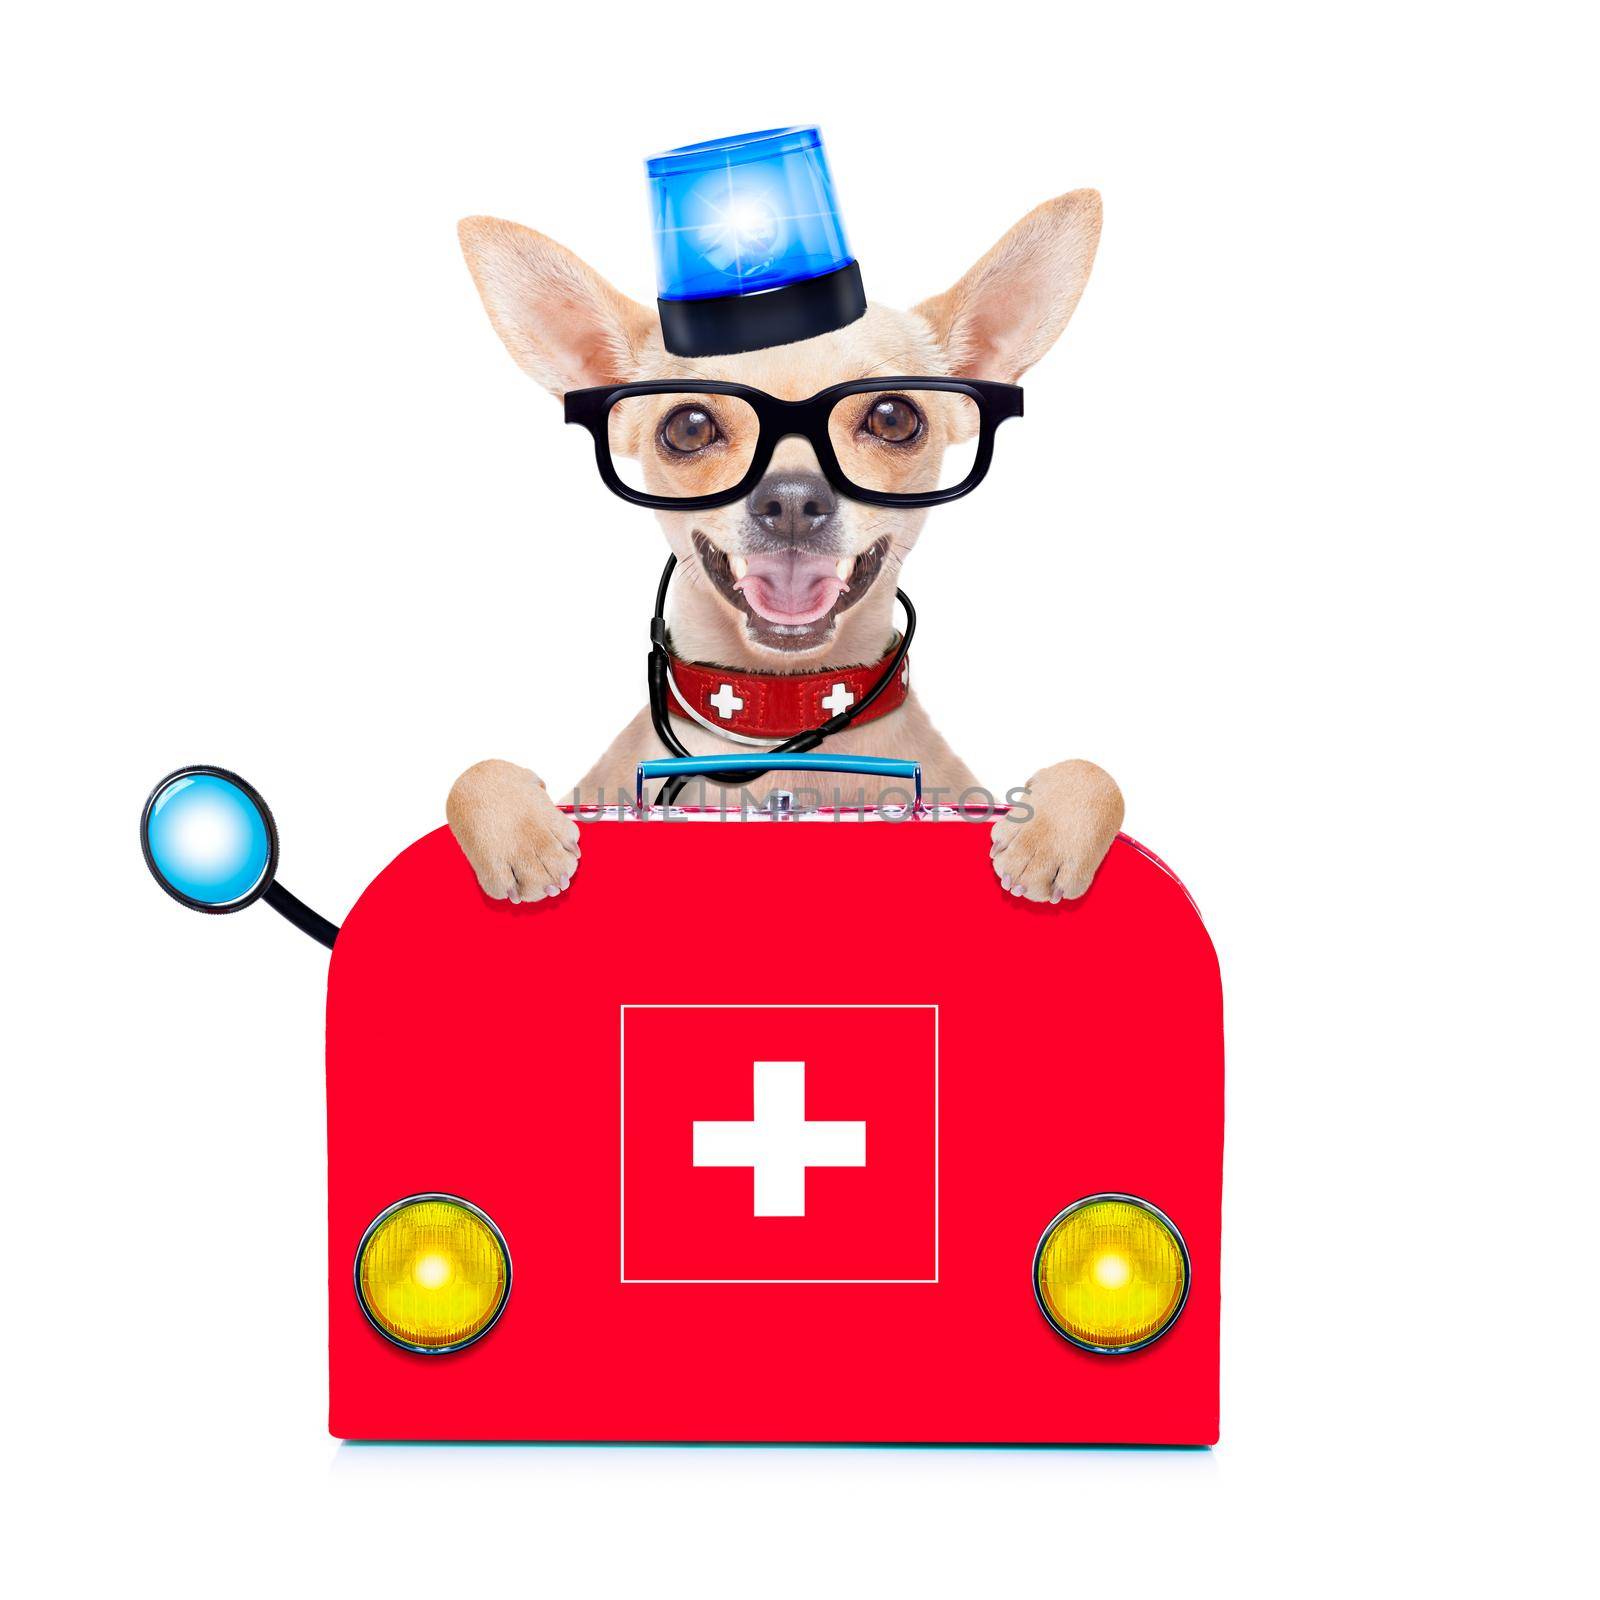 chihuahua dog as a medical veterinary emergency doctor with stethoscope and first aid kit behind a white and blank banner  and blue lights, isolated on white background